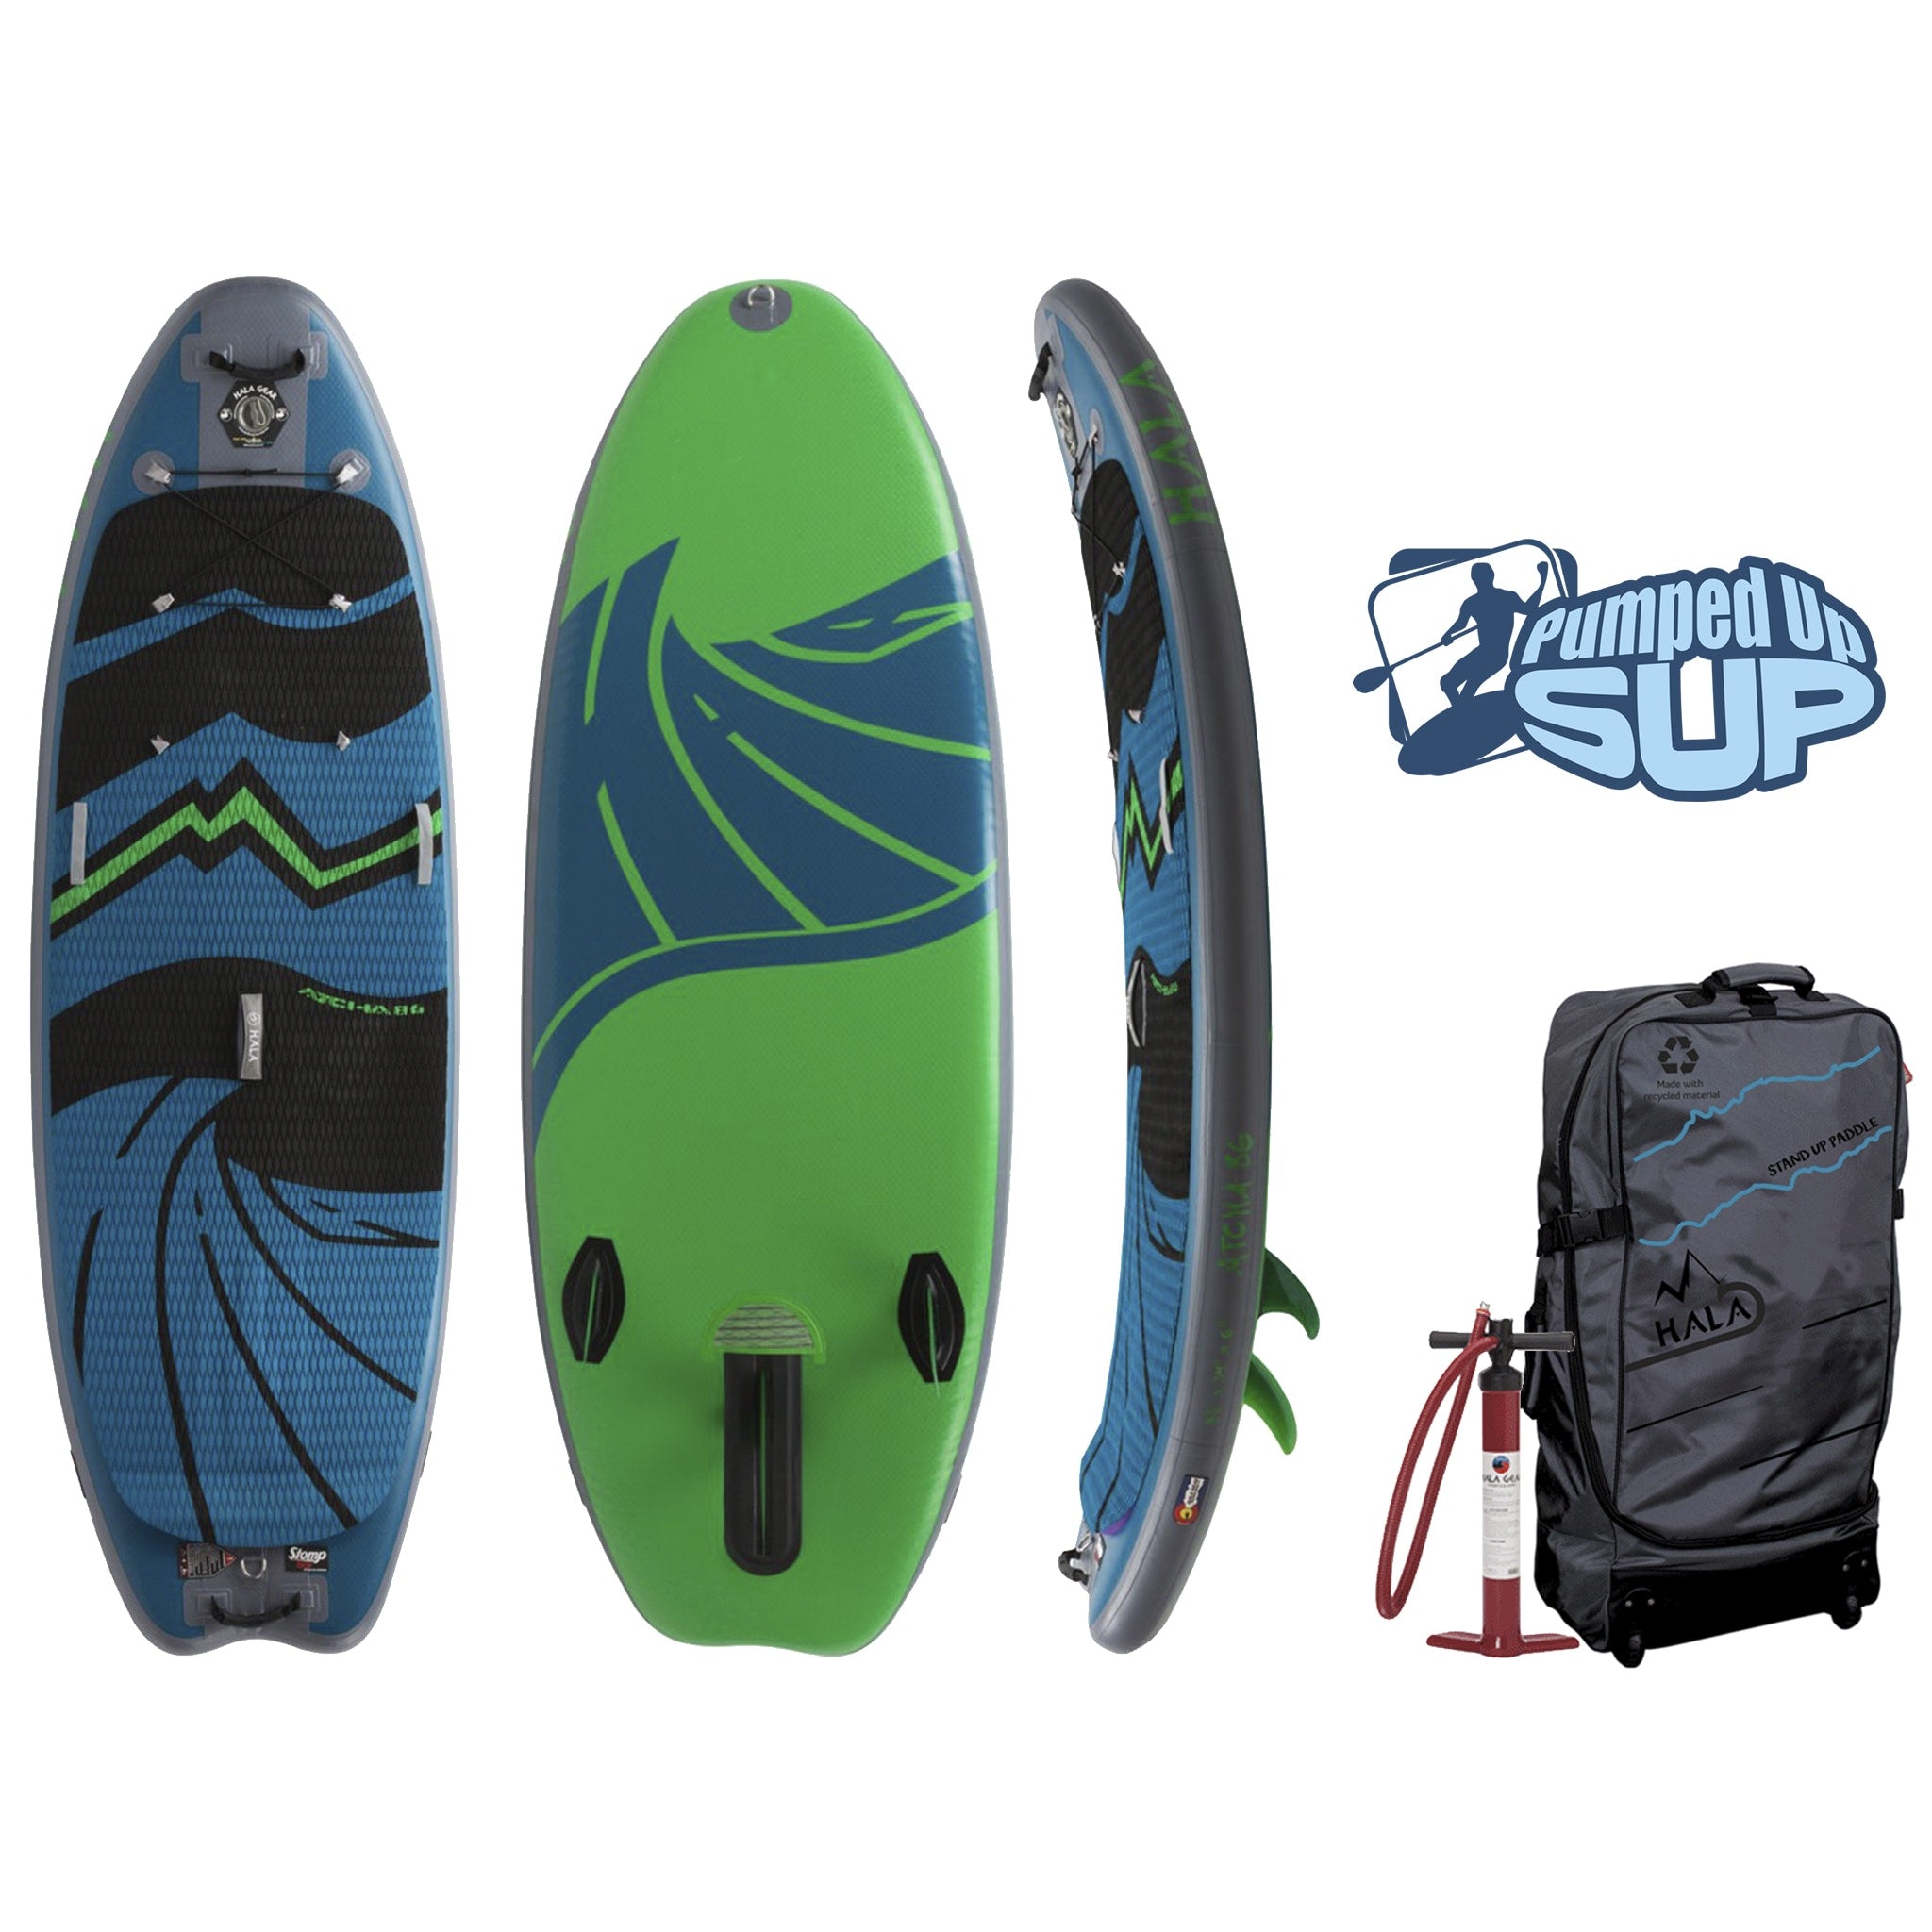 Boards $999 - $1199 | SUP-Boards